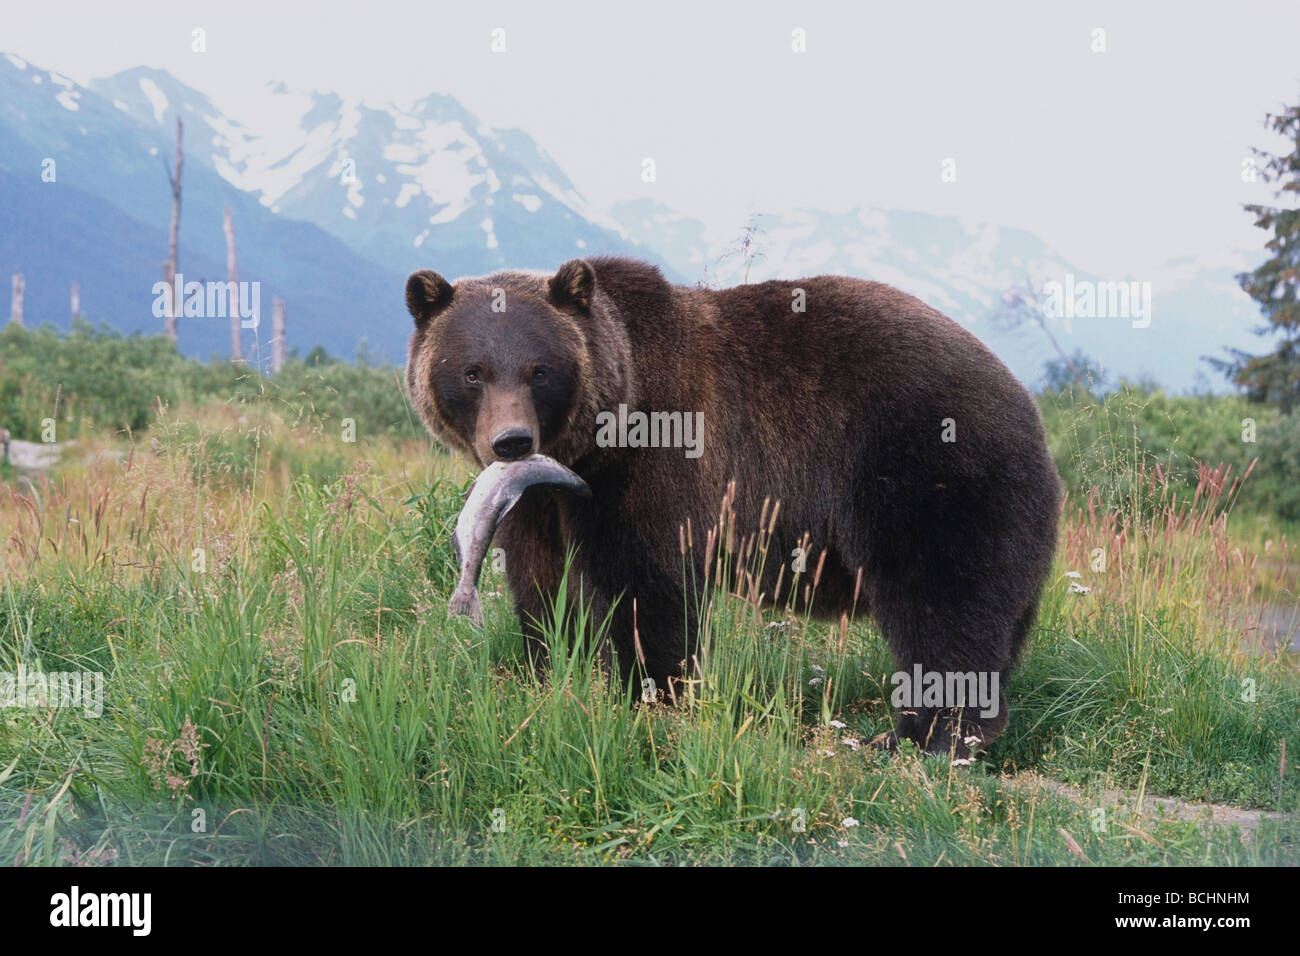 CAPTIVE: Brown Bear stands with a salmon in its mouth at the Alaska Wildlife Conservation Center, Alaska Stock Photo